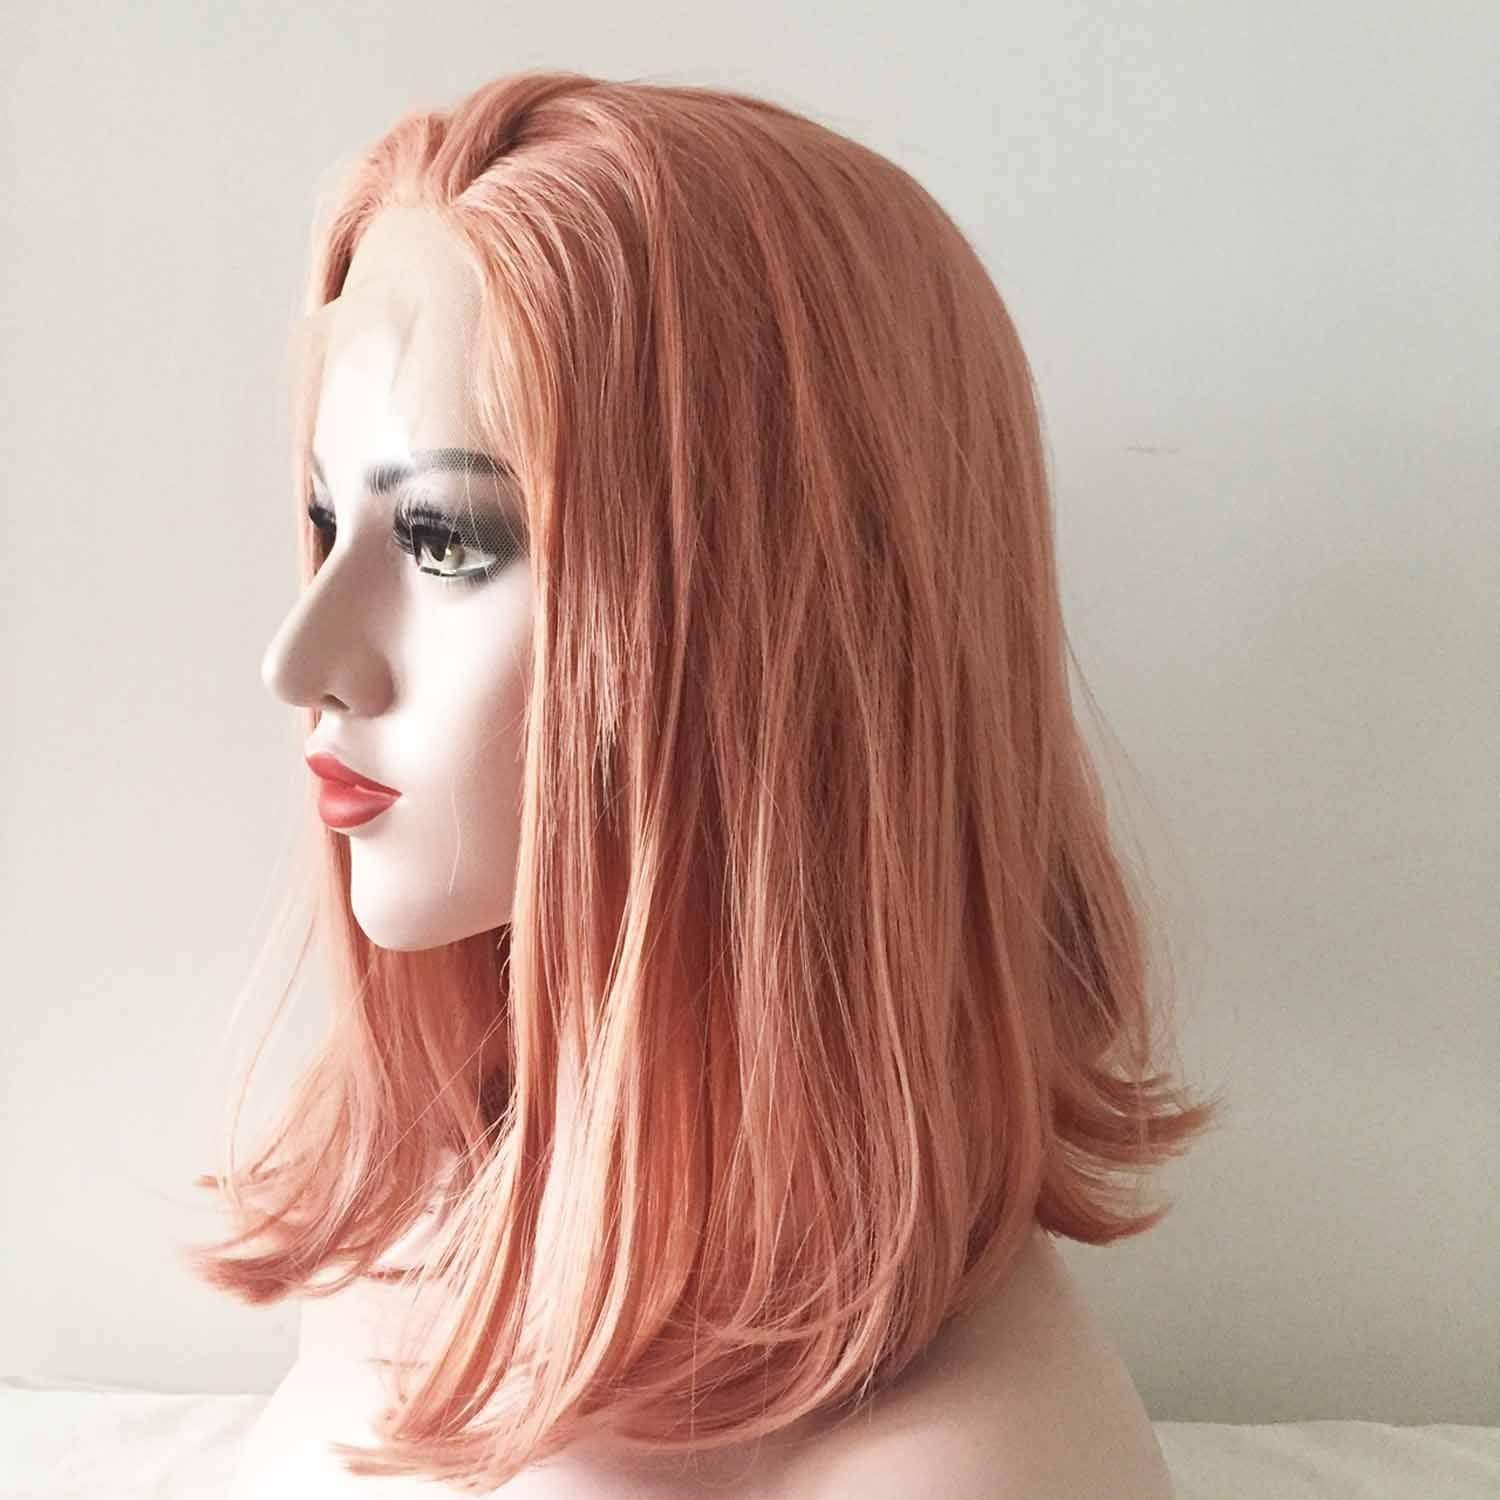 nevermindyrhead Women Lace Front Pink Side Part Shoulder Length Long Straight Hair Wig